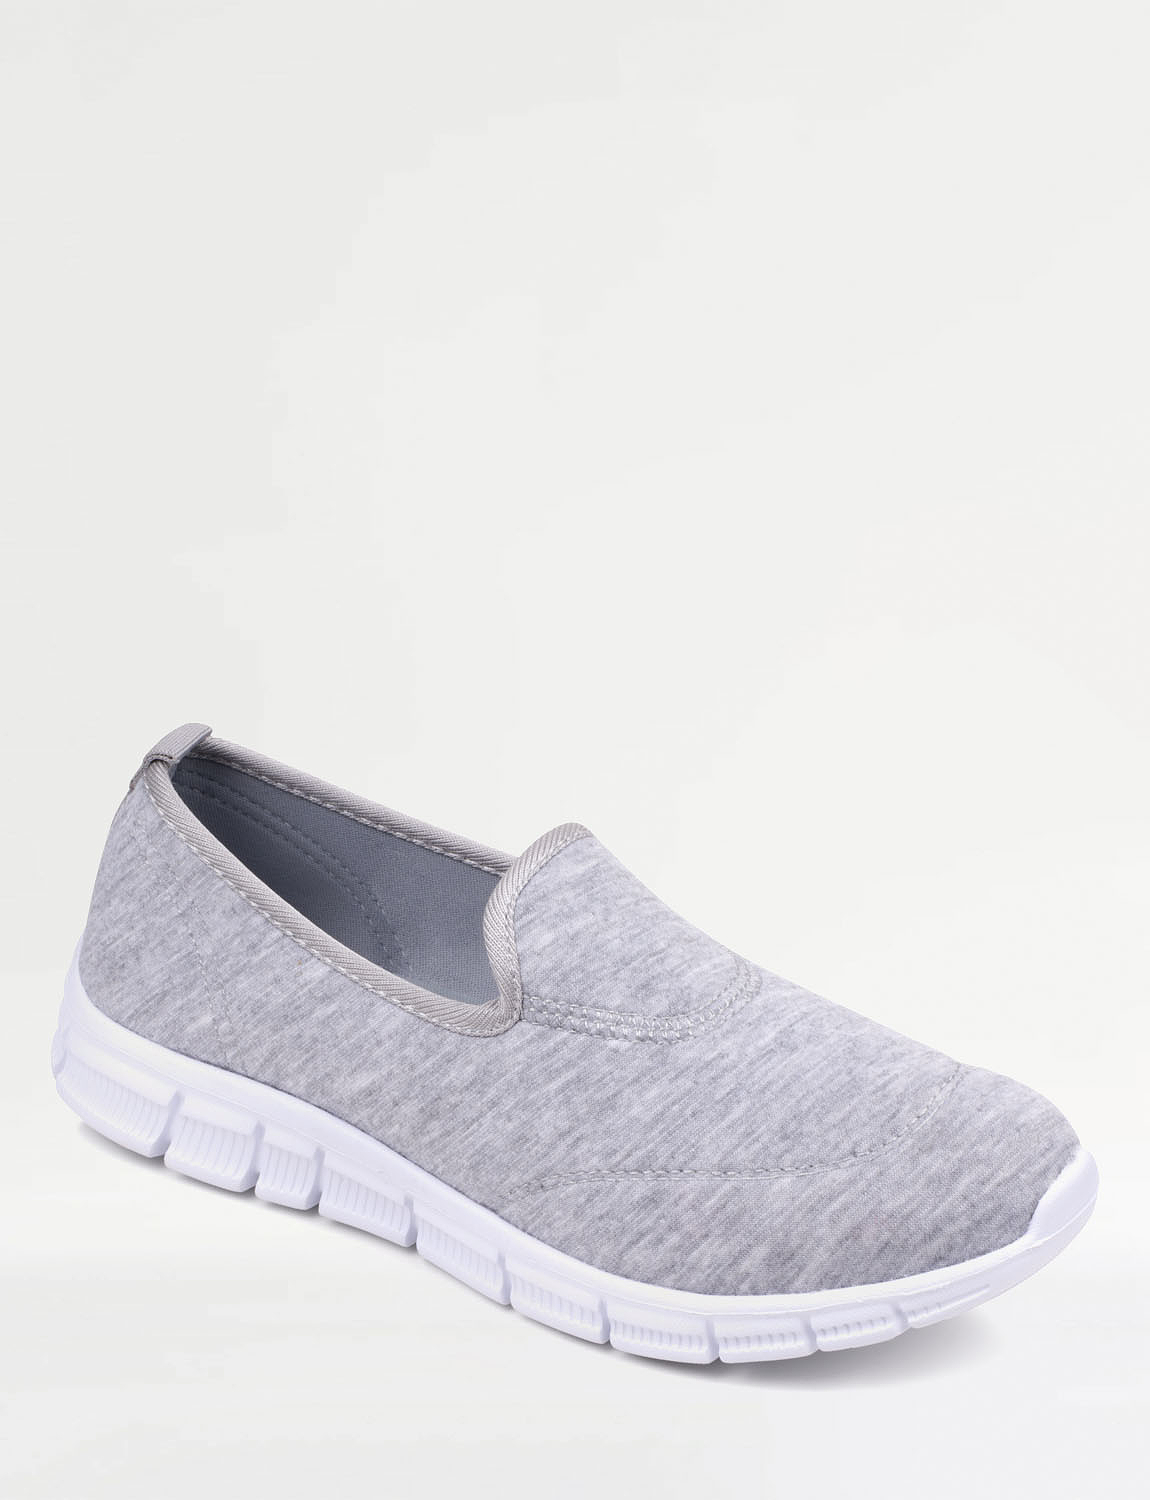 Ladies Slip-On Lightweight Shoes | Chums